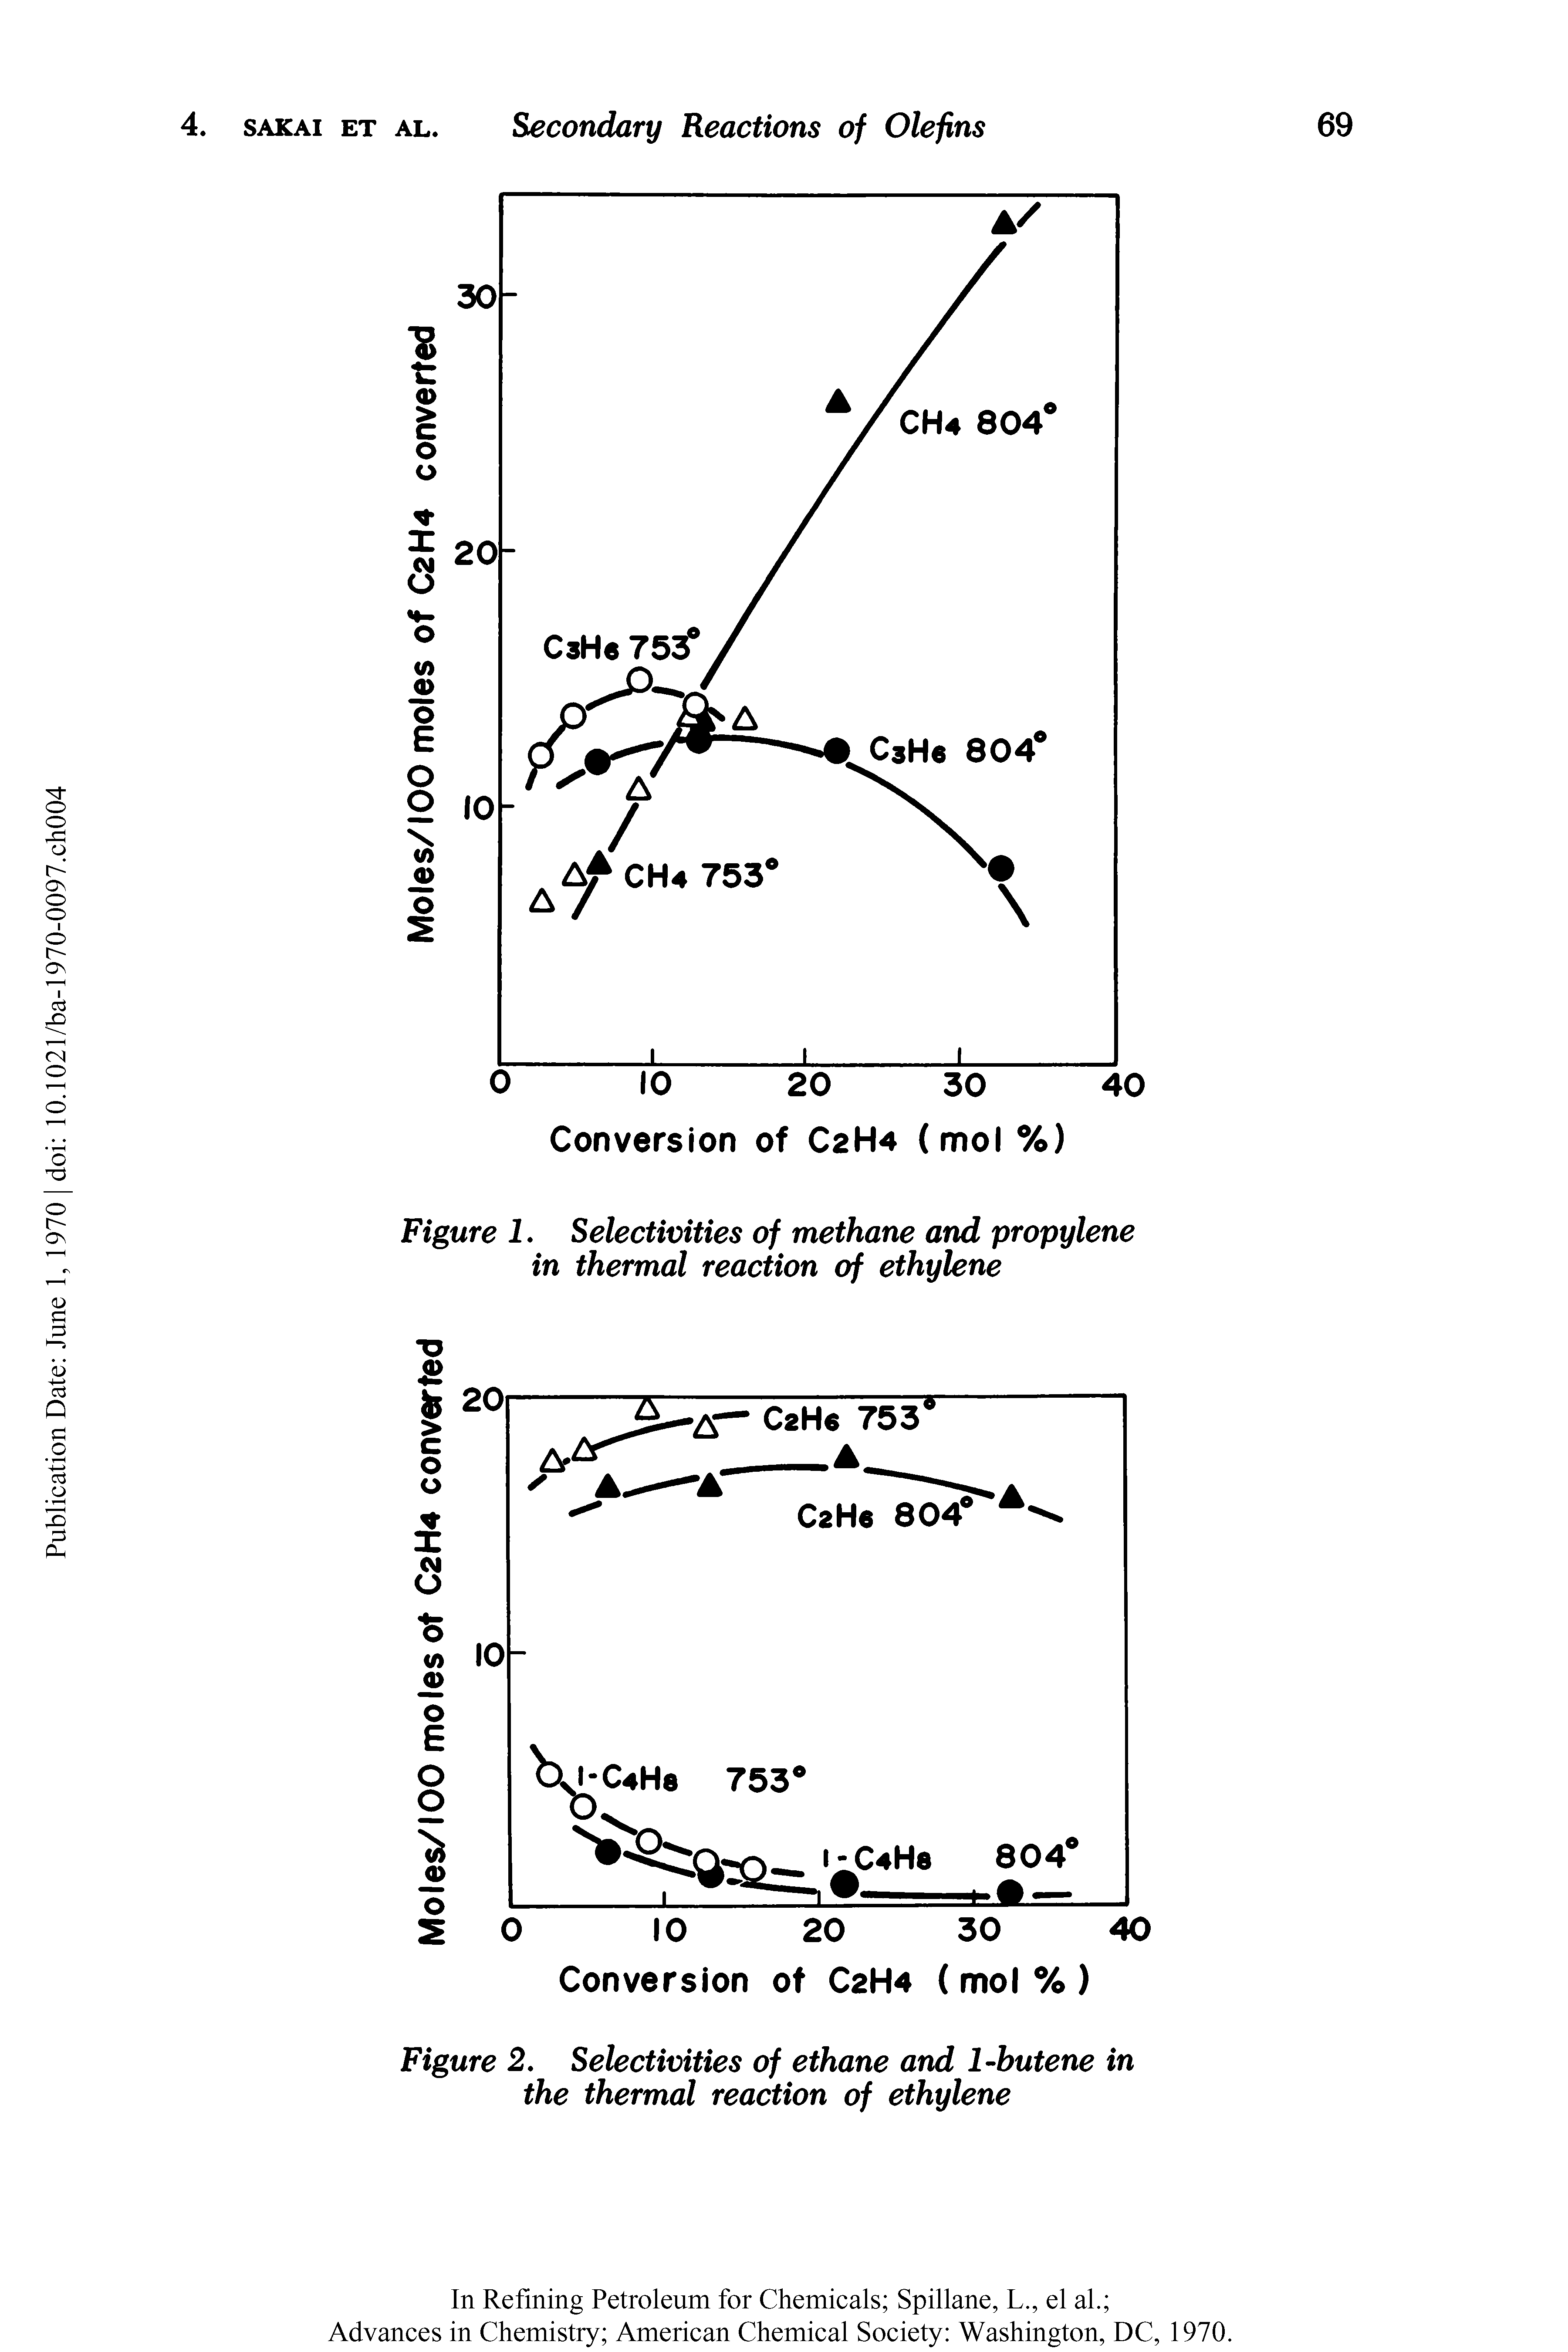 Figure 2. Selectivities of ethane and 1-butene in the thermal reaction of ethylene...